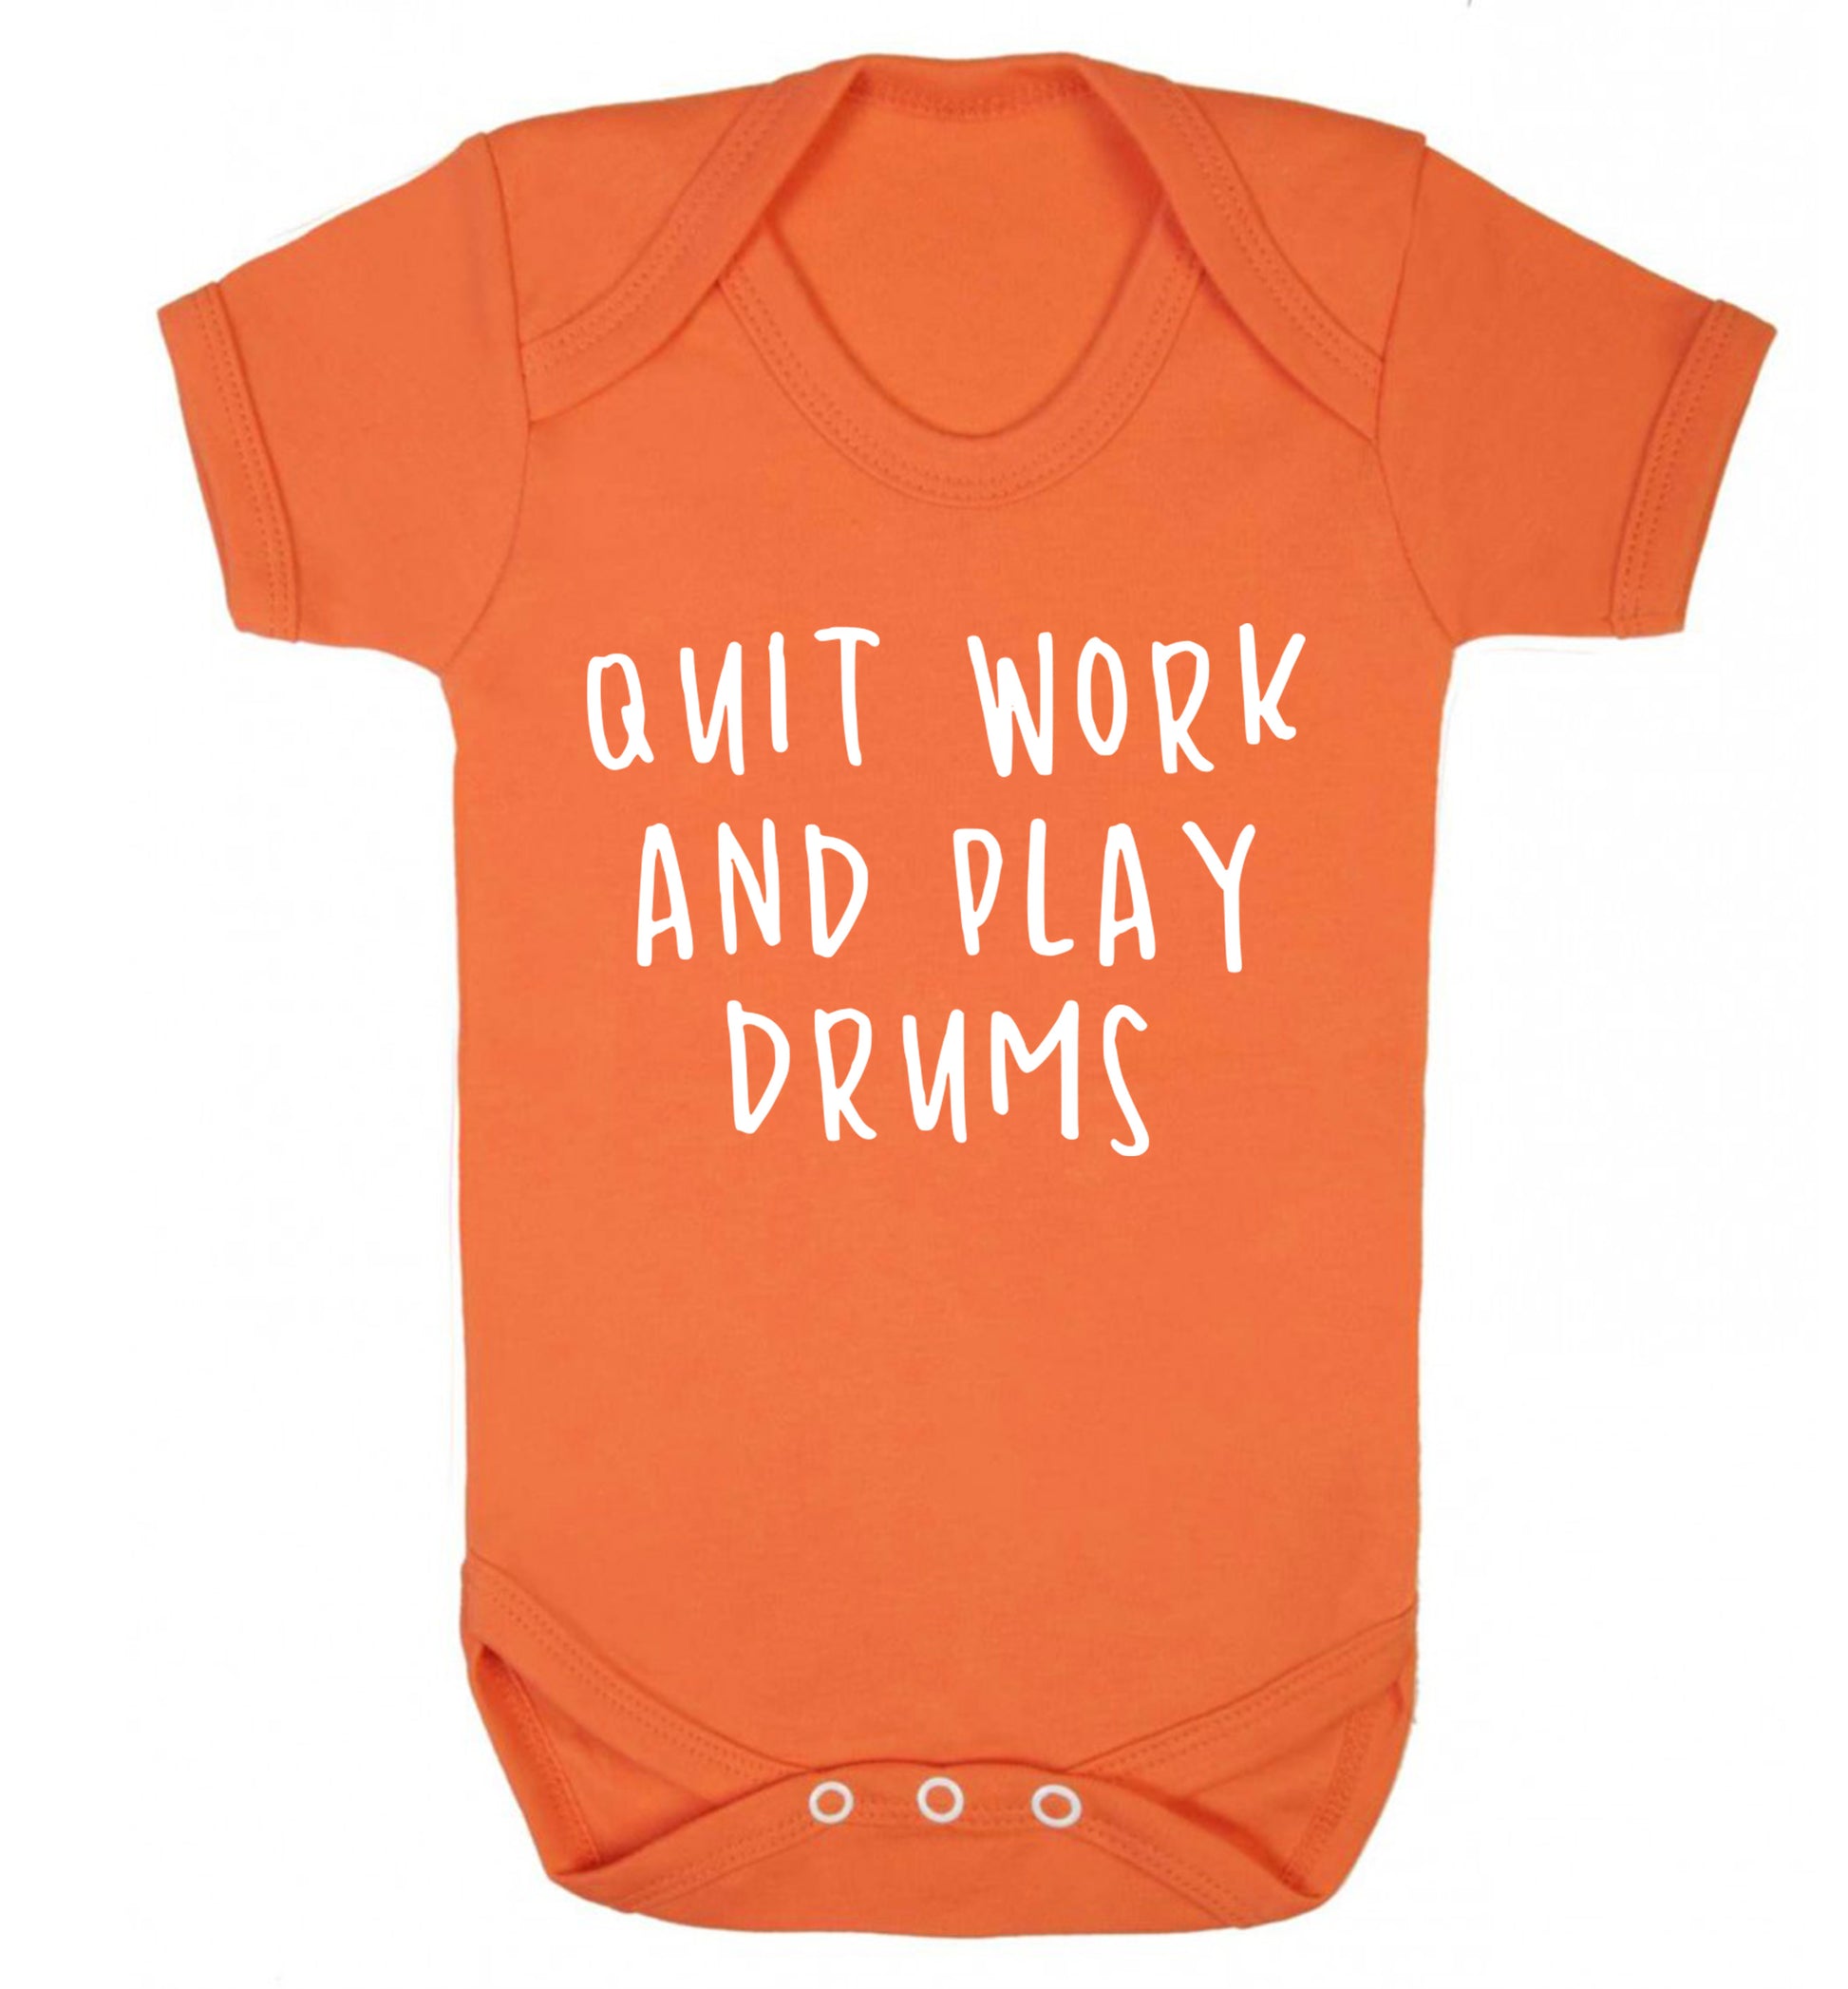 Quit work and play drums Baby Vest orange 18-24 months